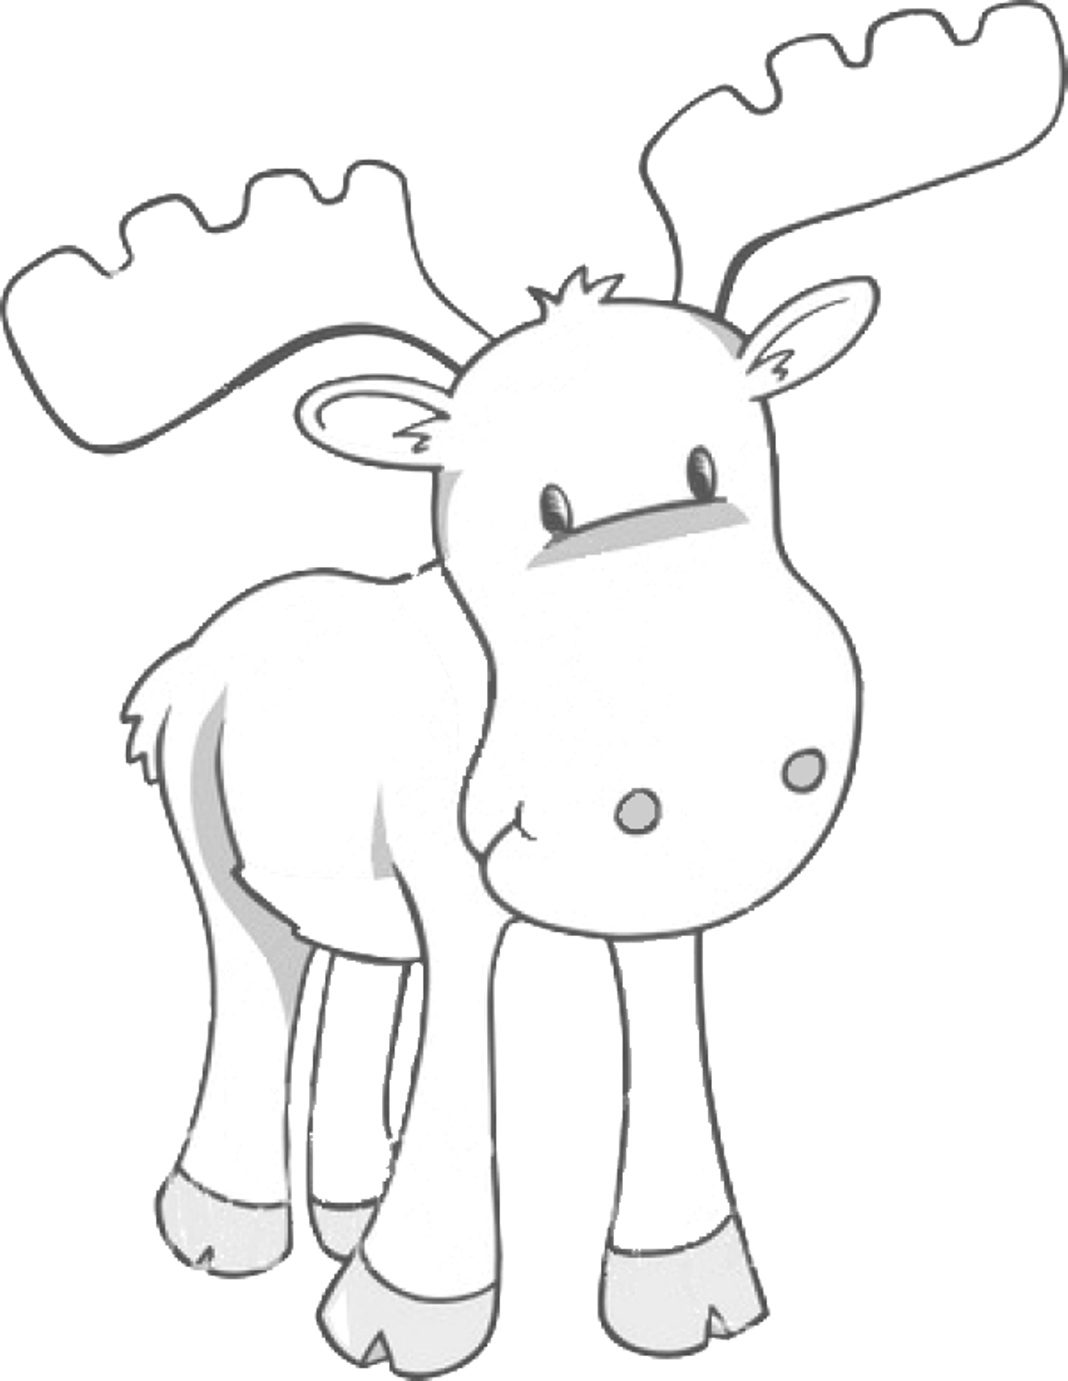 Moose Free Animal S For Kids14f3 Coloring Page